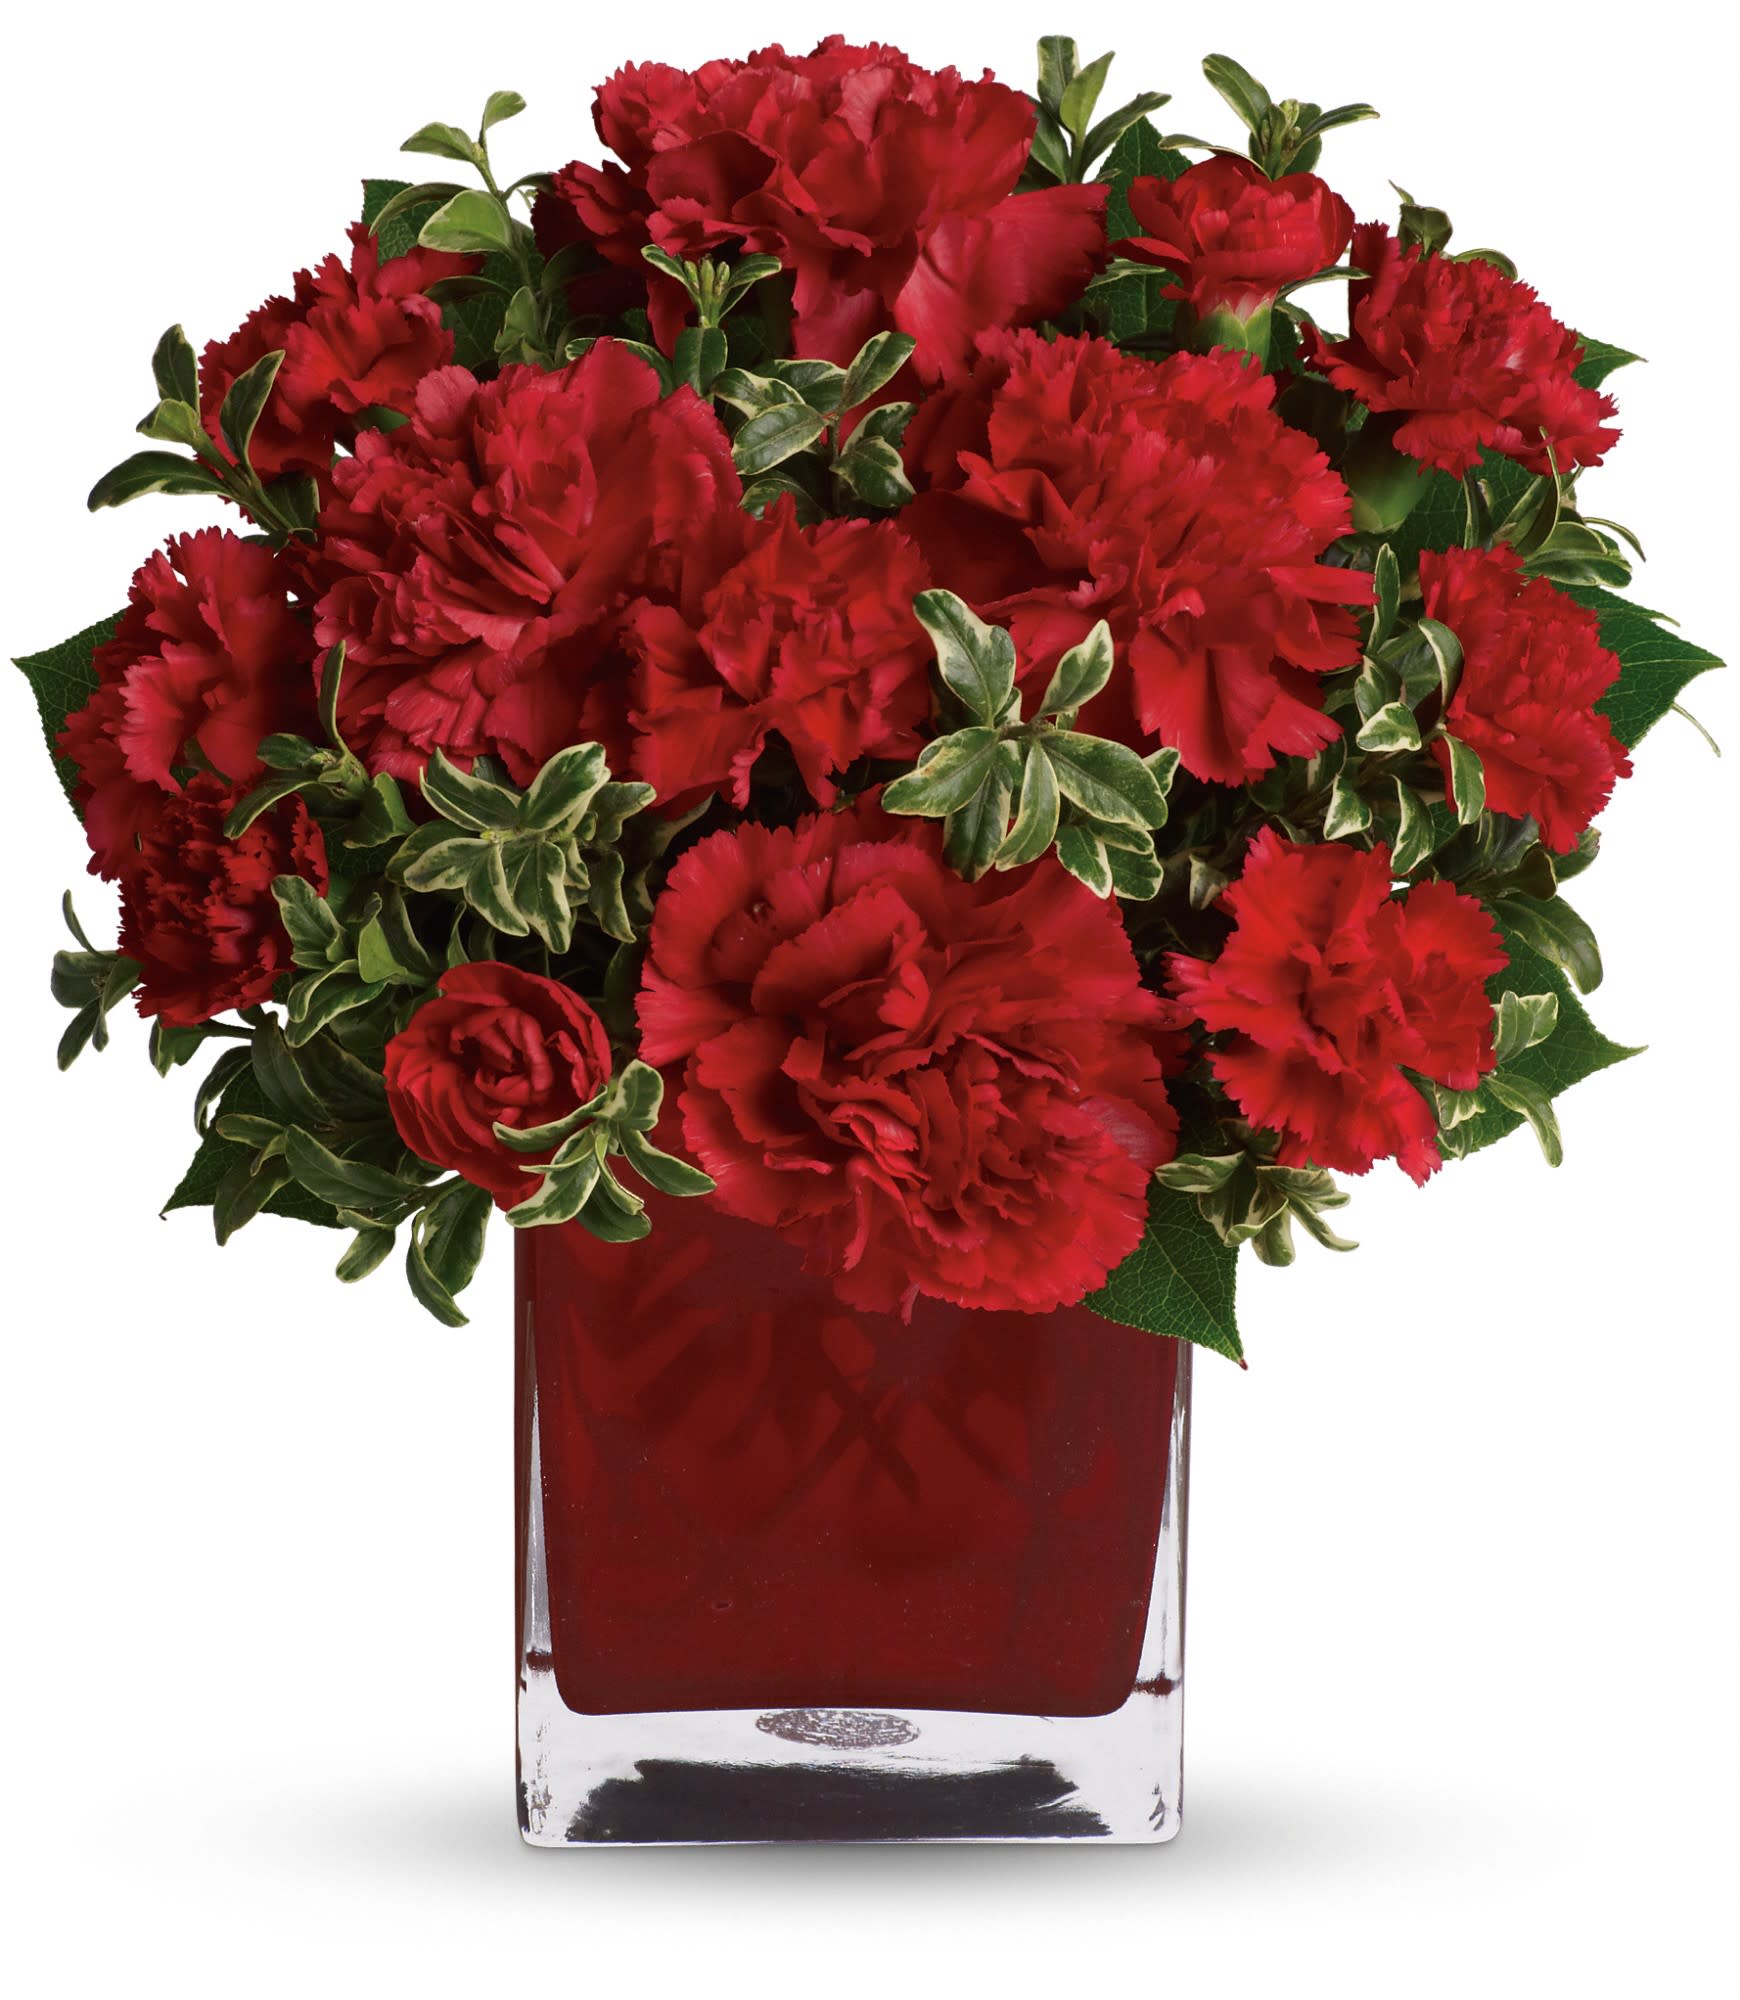 Precious Love - Simply speaking, red means romance. Send this bouquet of vibrant red carnations to your sweetheart and you'll convey passion, energy and desire. Remember also that you're sending not one gift but two: gorgeous flowers and a colorful cube vase.  